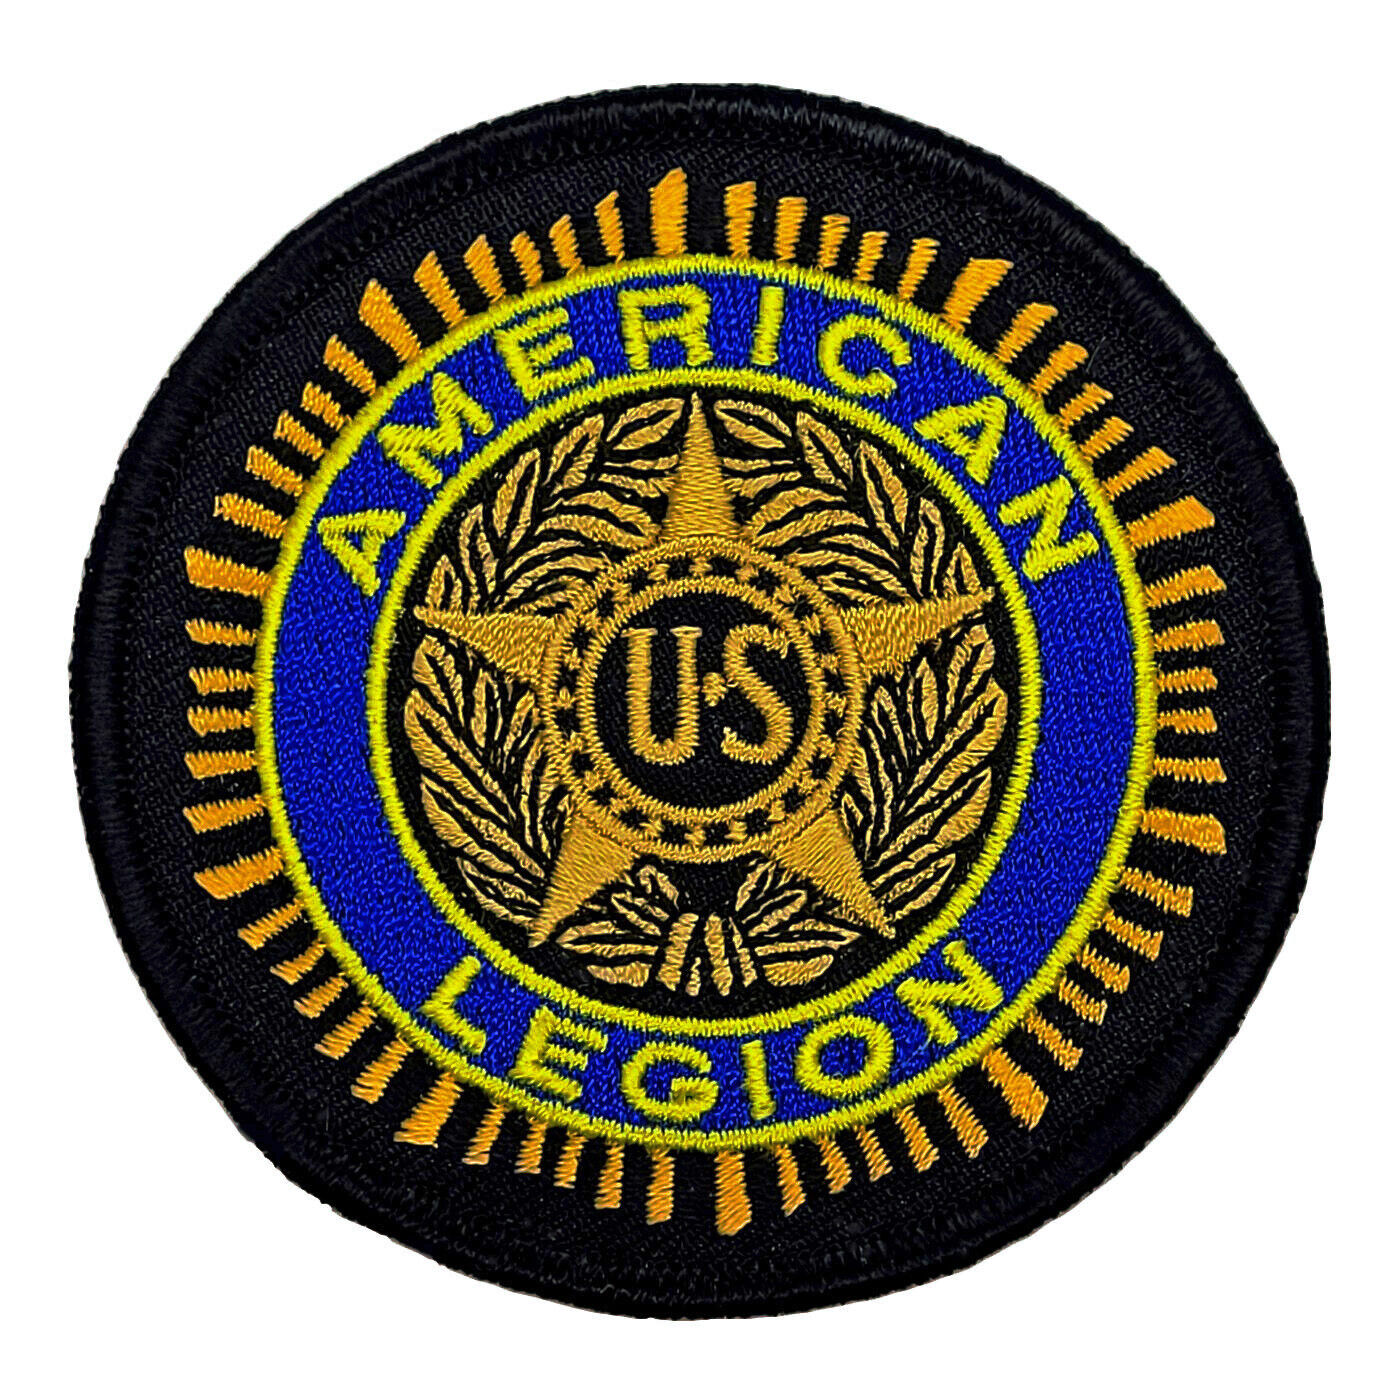 American Legion Patch [iron on sew on -3.0 inch- P5]